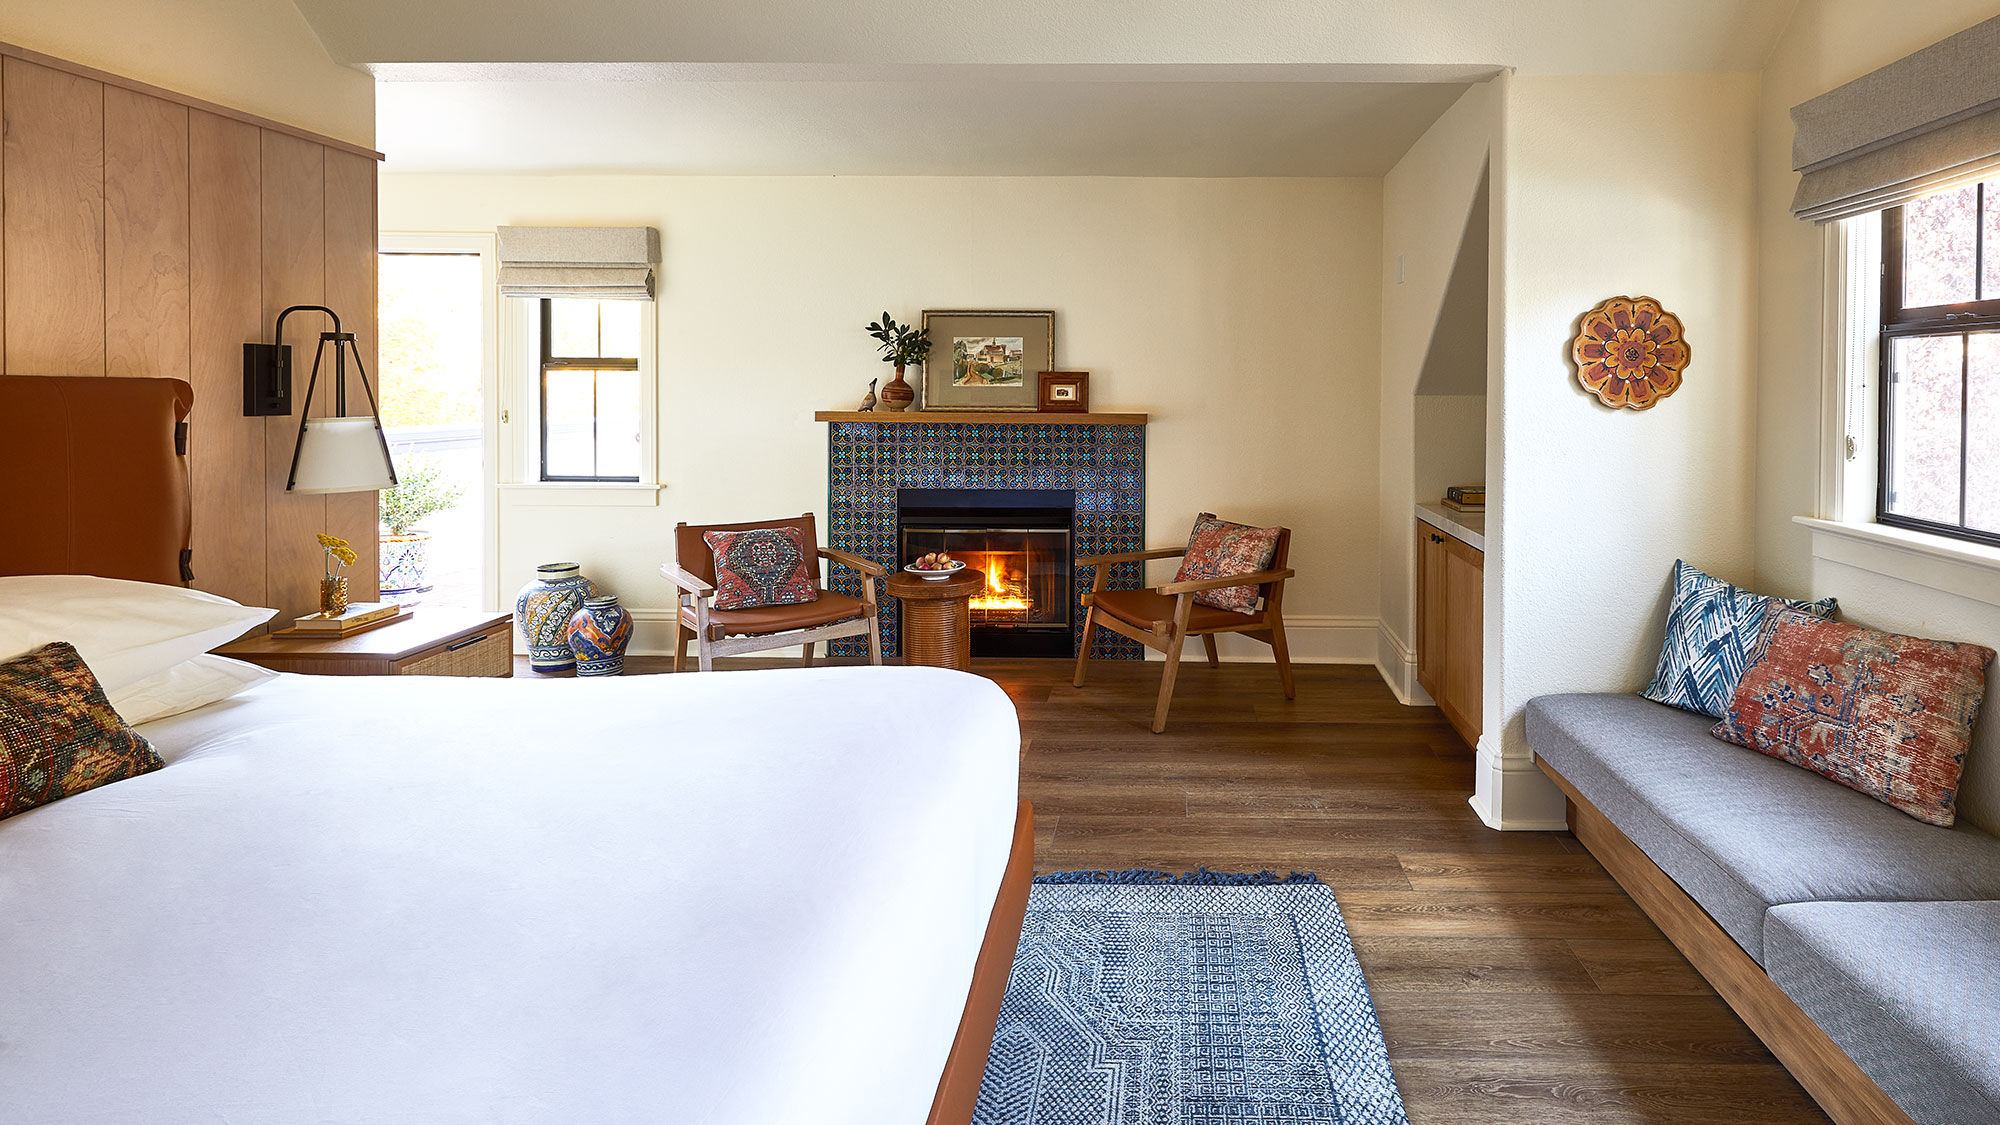 Rooms in the Stavrand's Cazadero House feature a mix of gas fireplaces, freestanding tubs and outdoor cedar hot tubs.